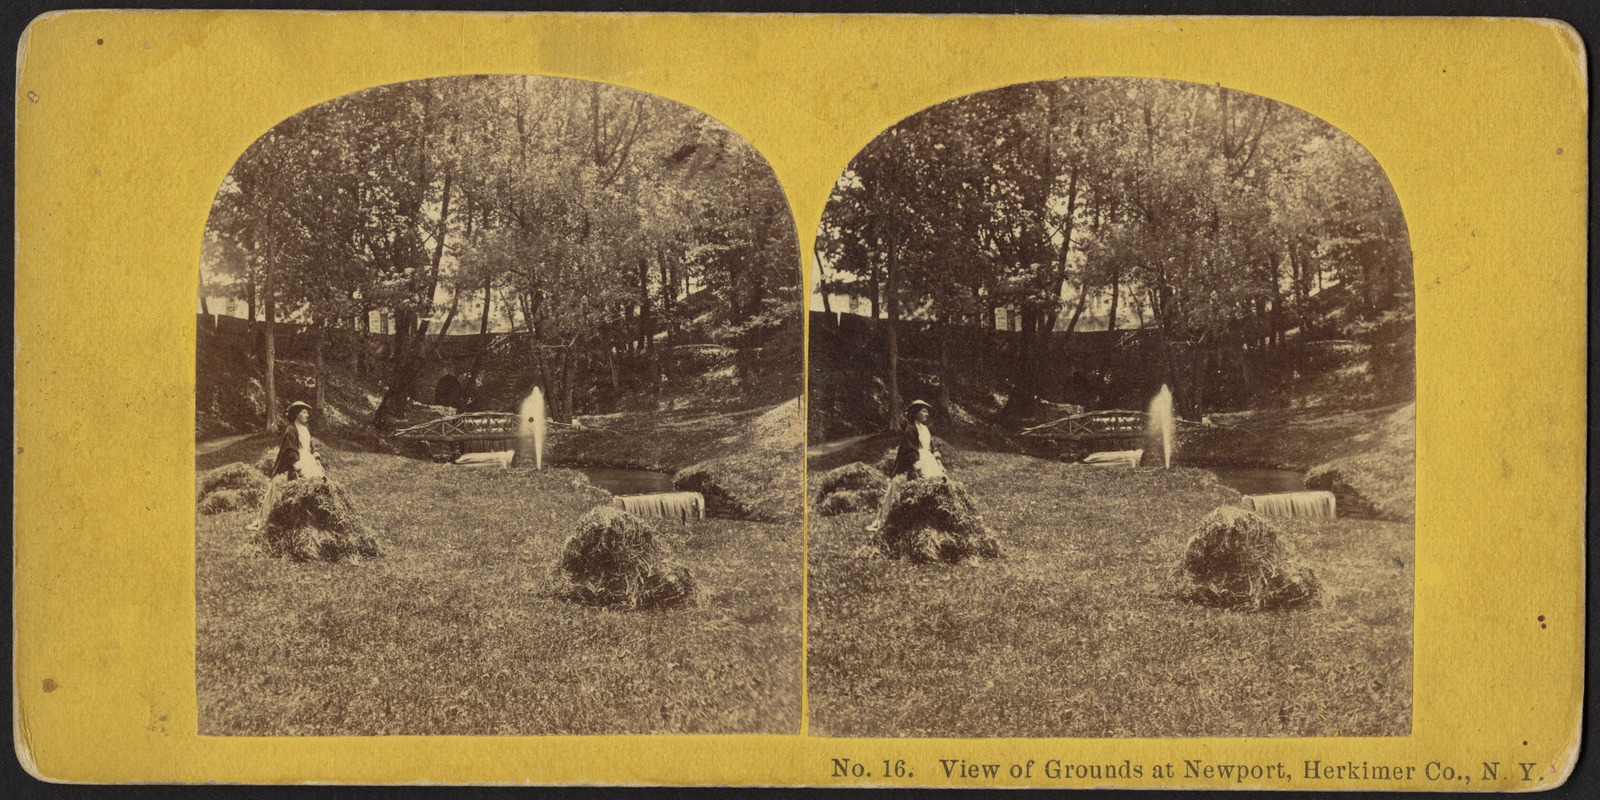 View of grounds at Newport, Herkimer Co., N.Y.